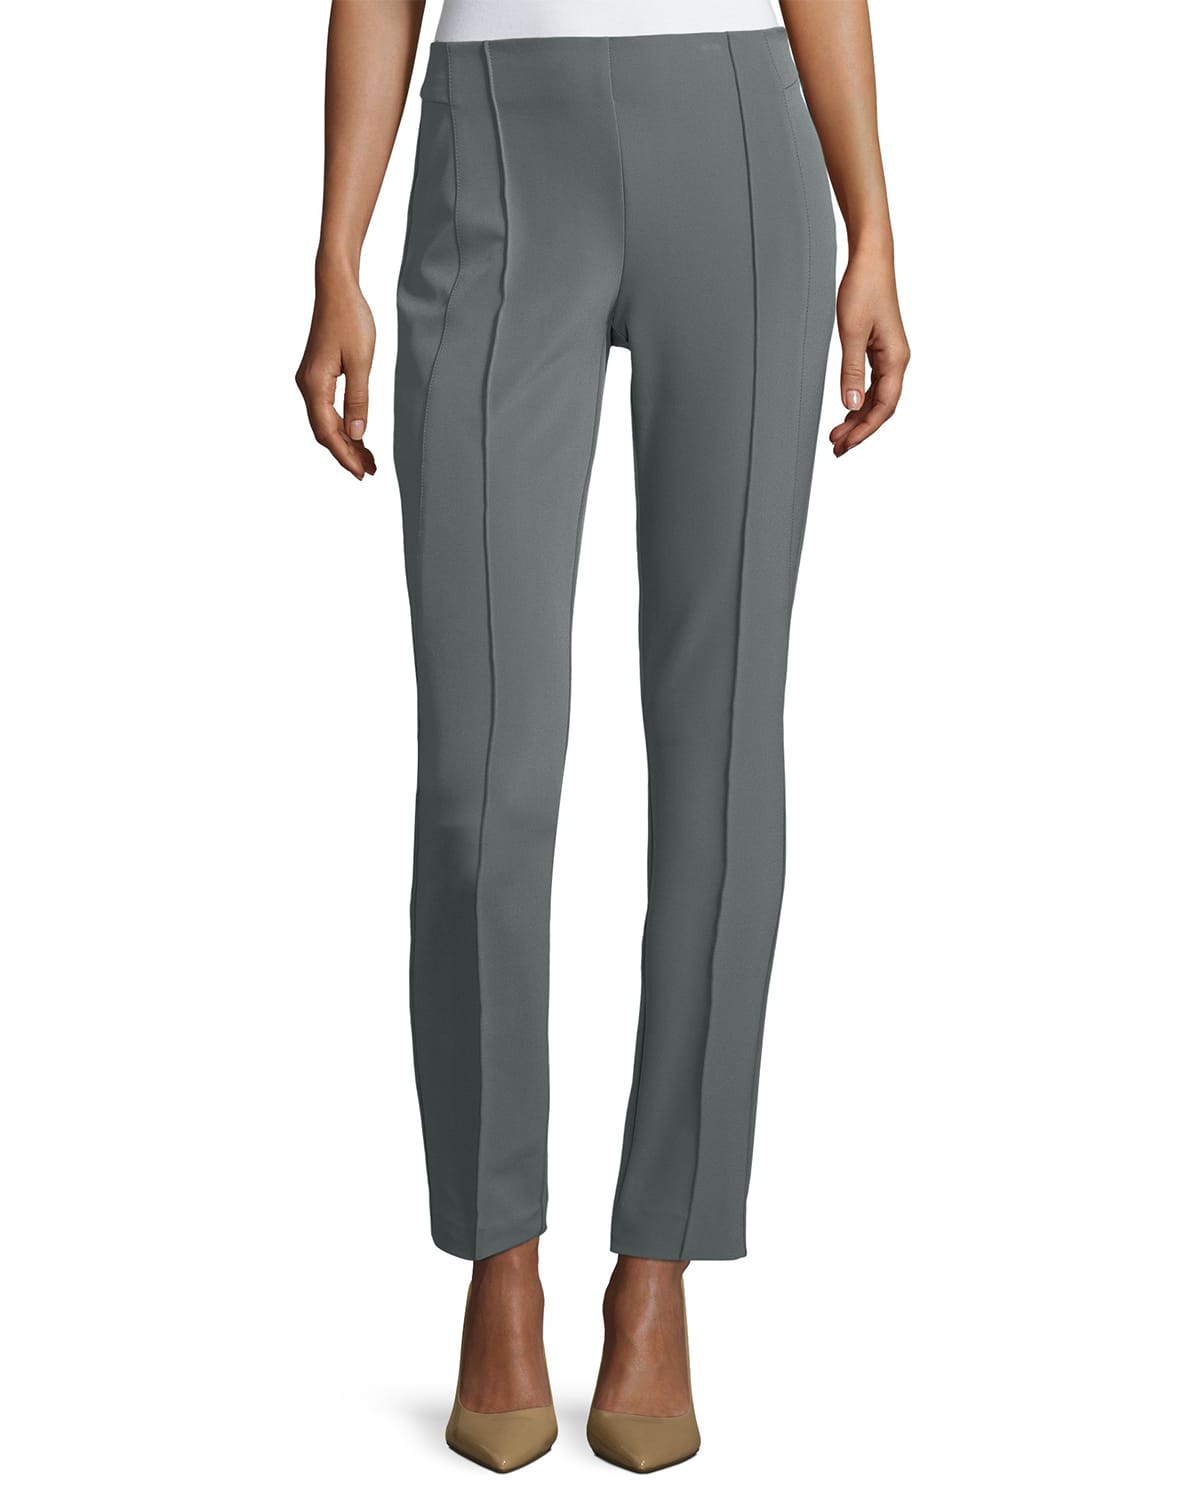 Petite Gramercy Acclaimed Stretch Pants